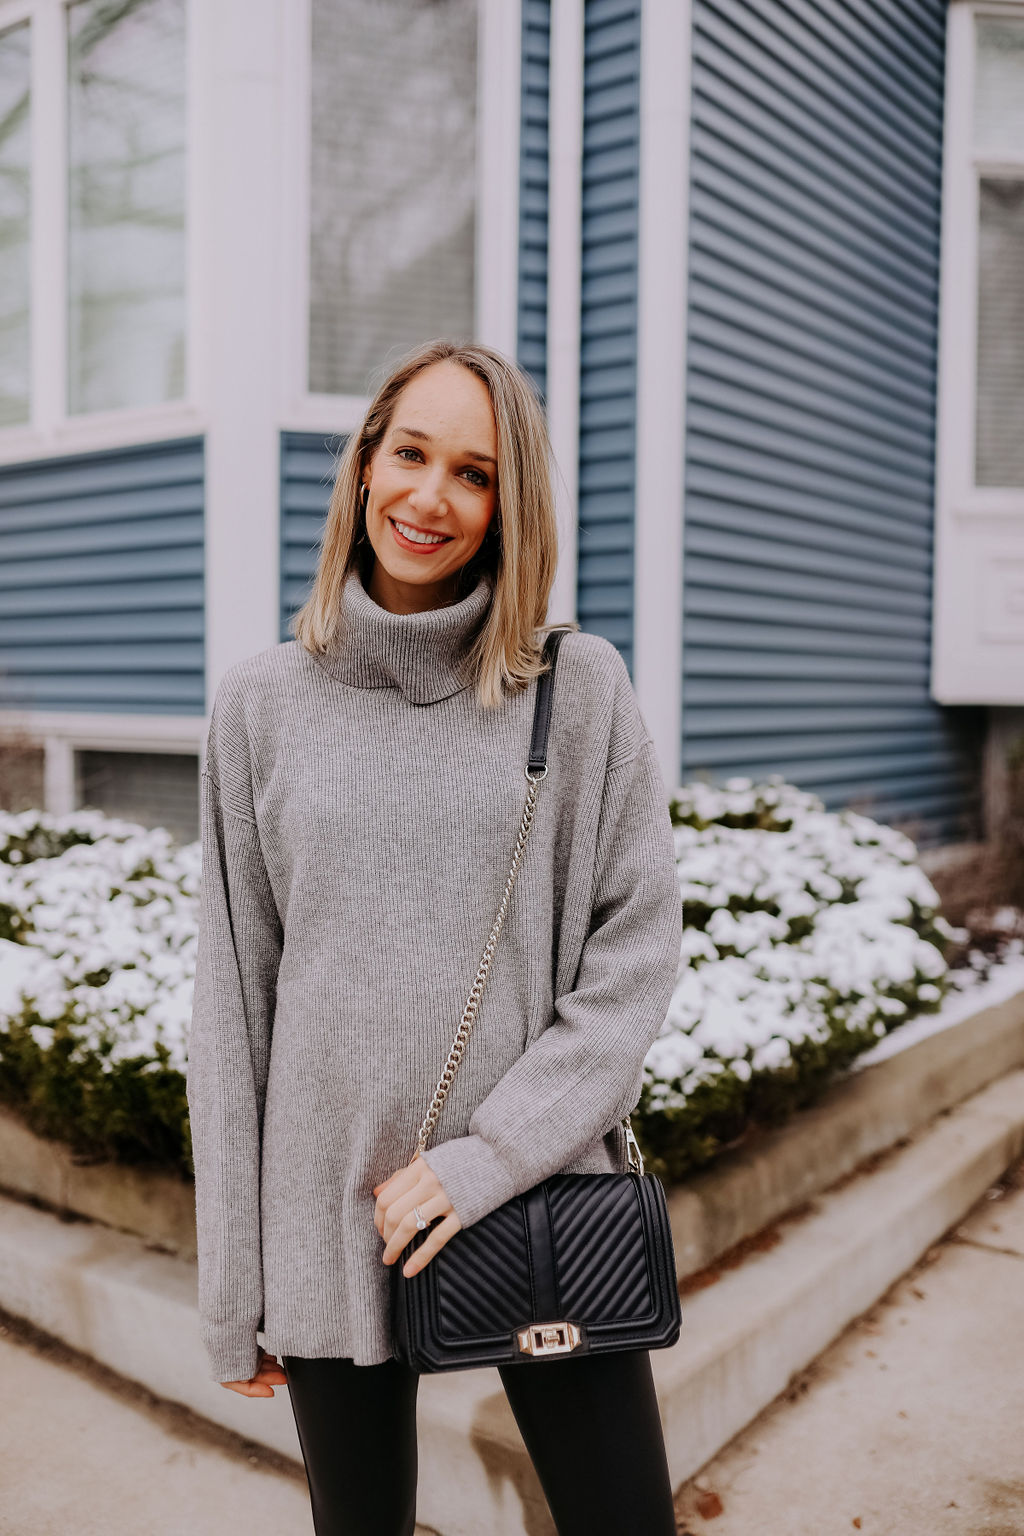 5 Styling Tips for Oversized Sweater Outfits | The Fox & She | Style Blog